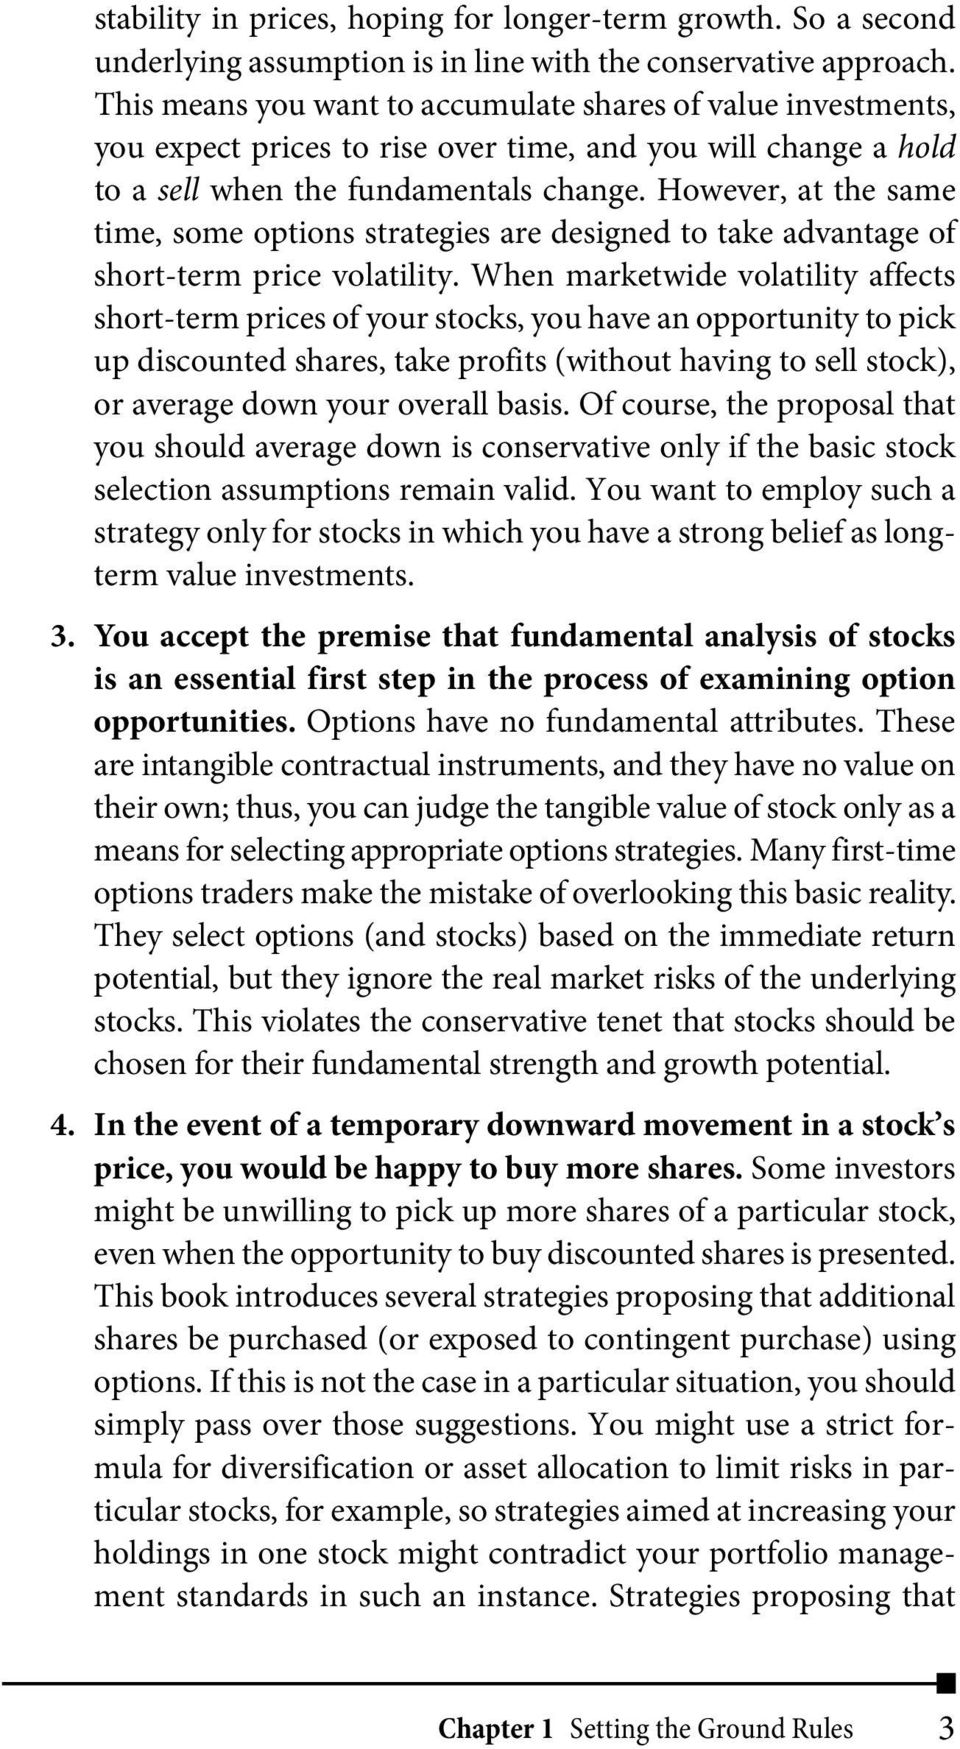 However, at the same time, some options strategies are designed to take advantage of short-term price volatility.